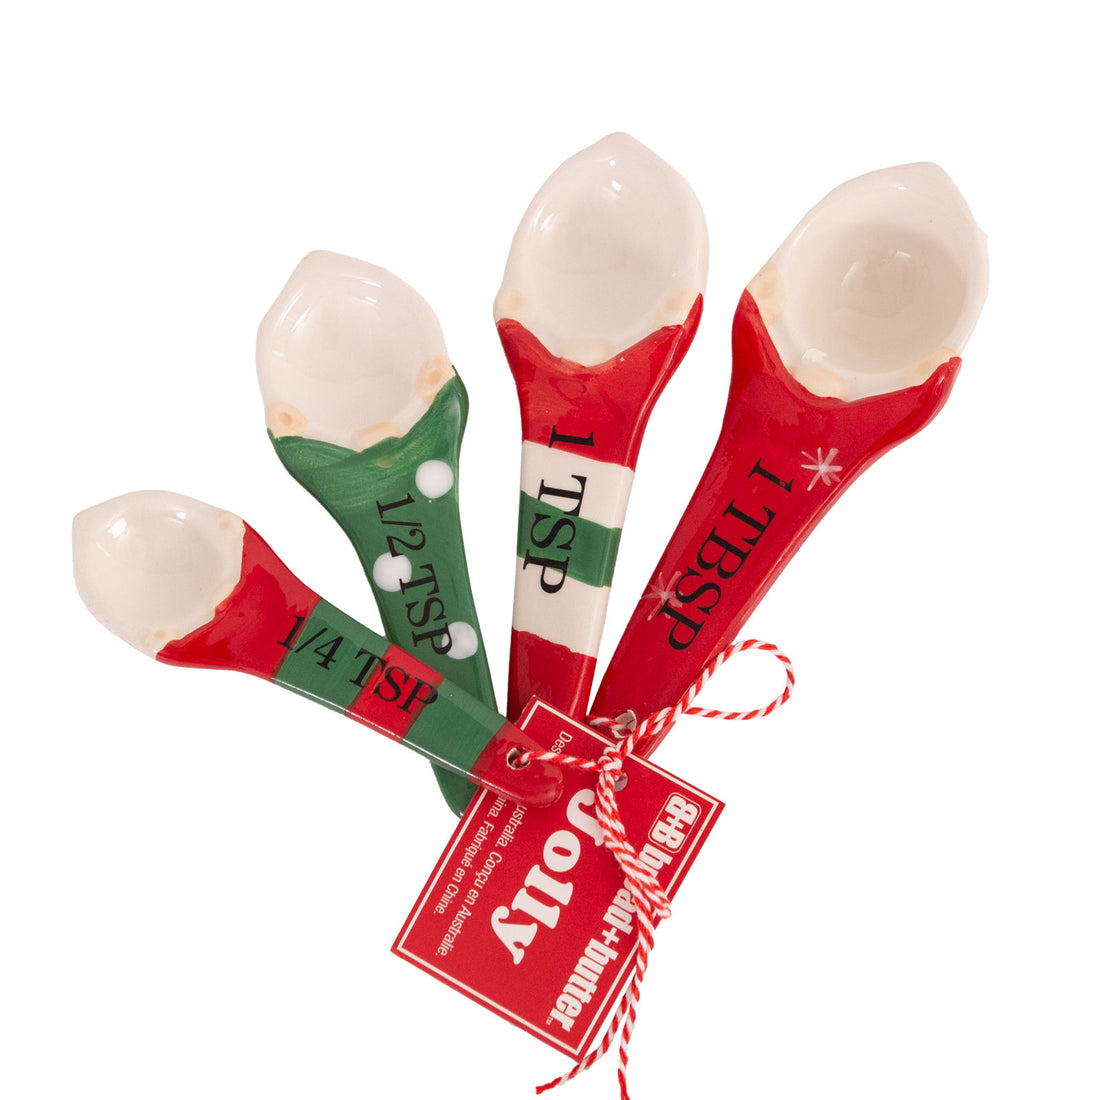 Bread and Butter Gnome Measuring Spoons - 4 Pack - Green/ Red/ White-Decorations-PEROZ Accessories